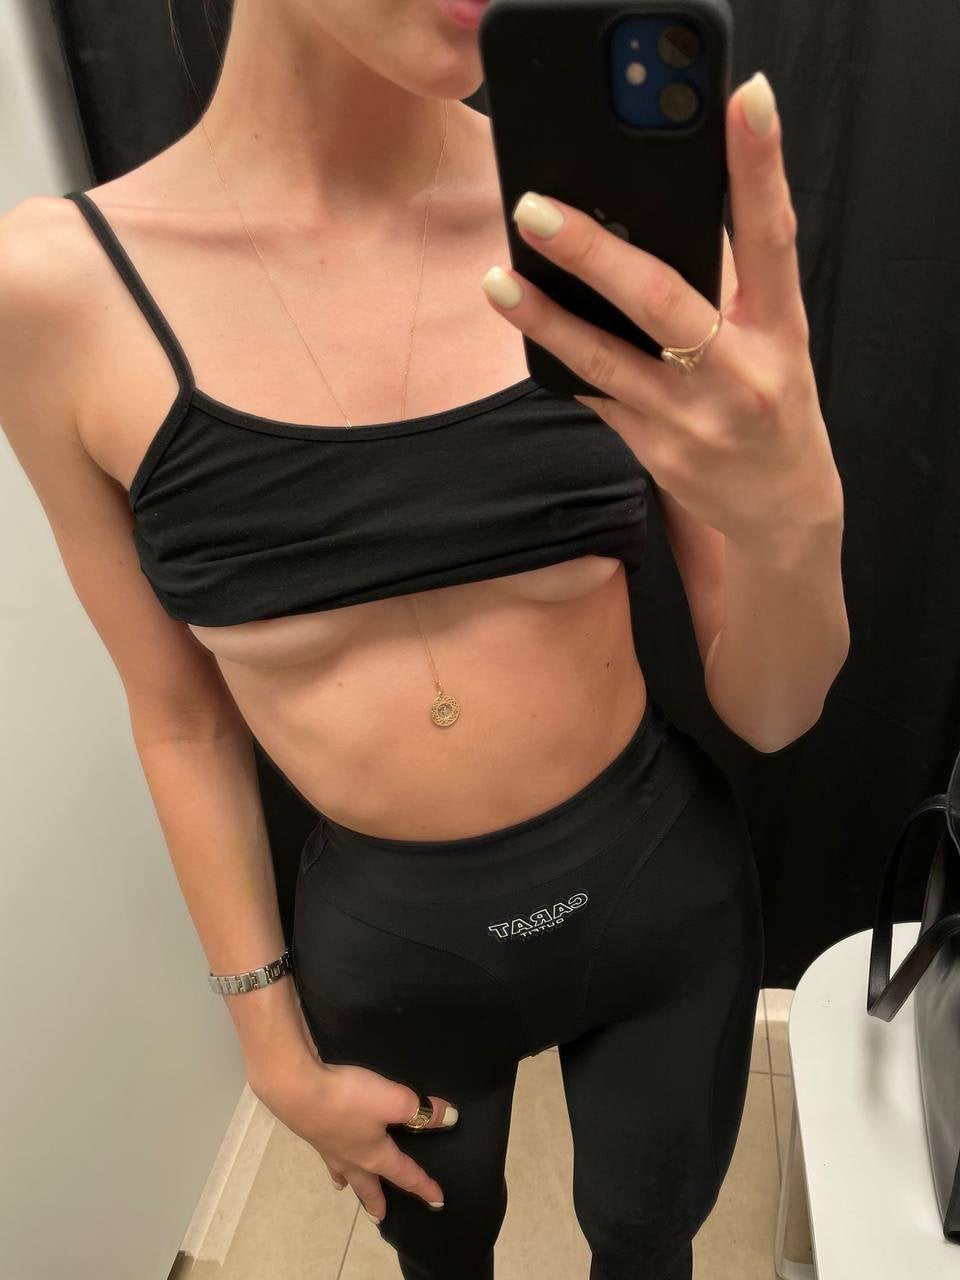 do you like my selfie in the fitting room, daddy?